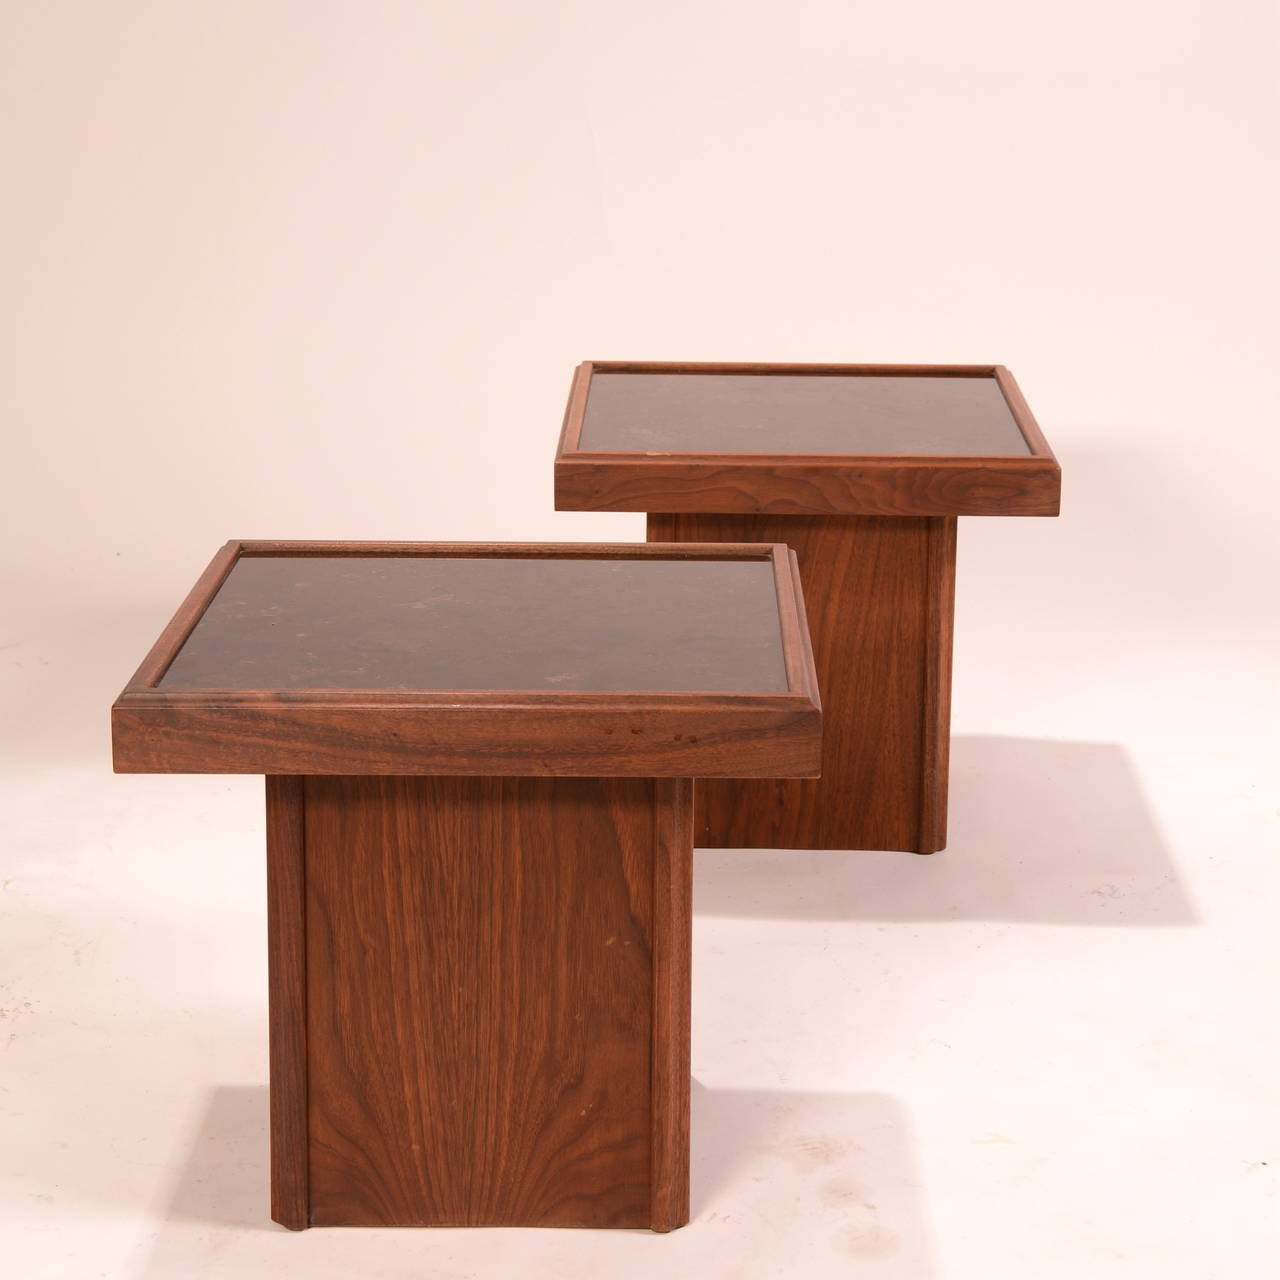 A pair of square walnut tables with a tile top on a square pedestal base, by John Keal for Brown Saltman. American, circa 1950.